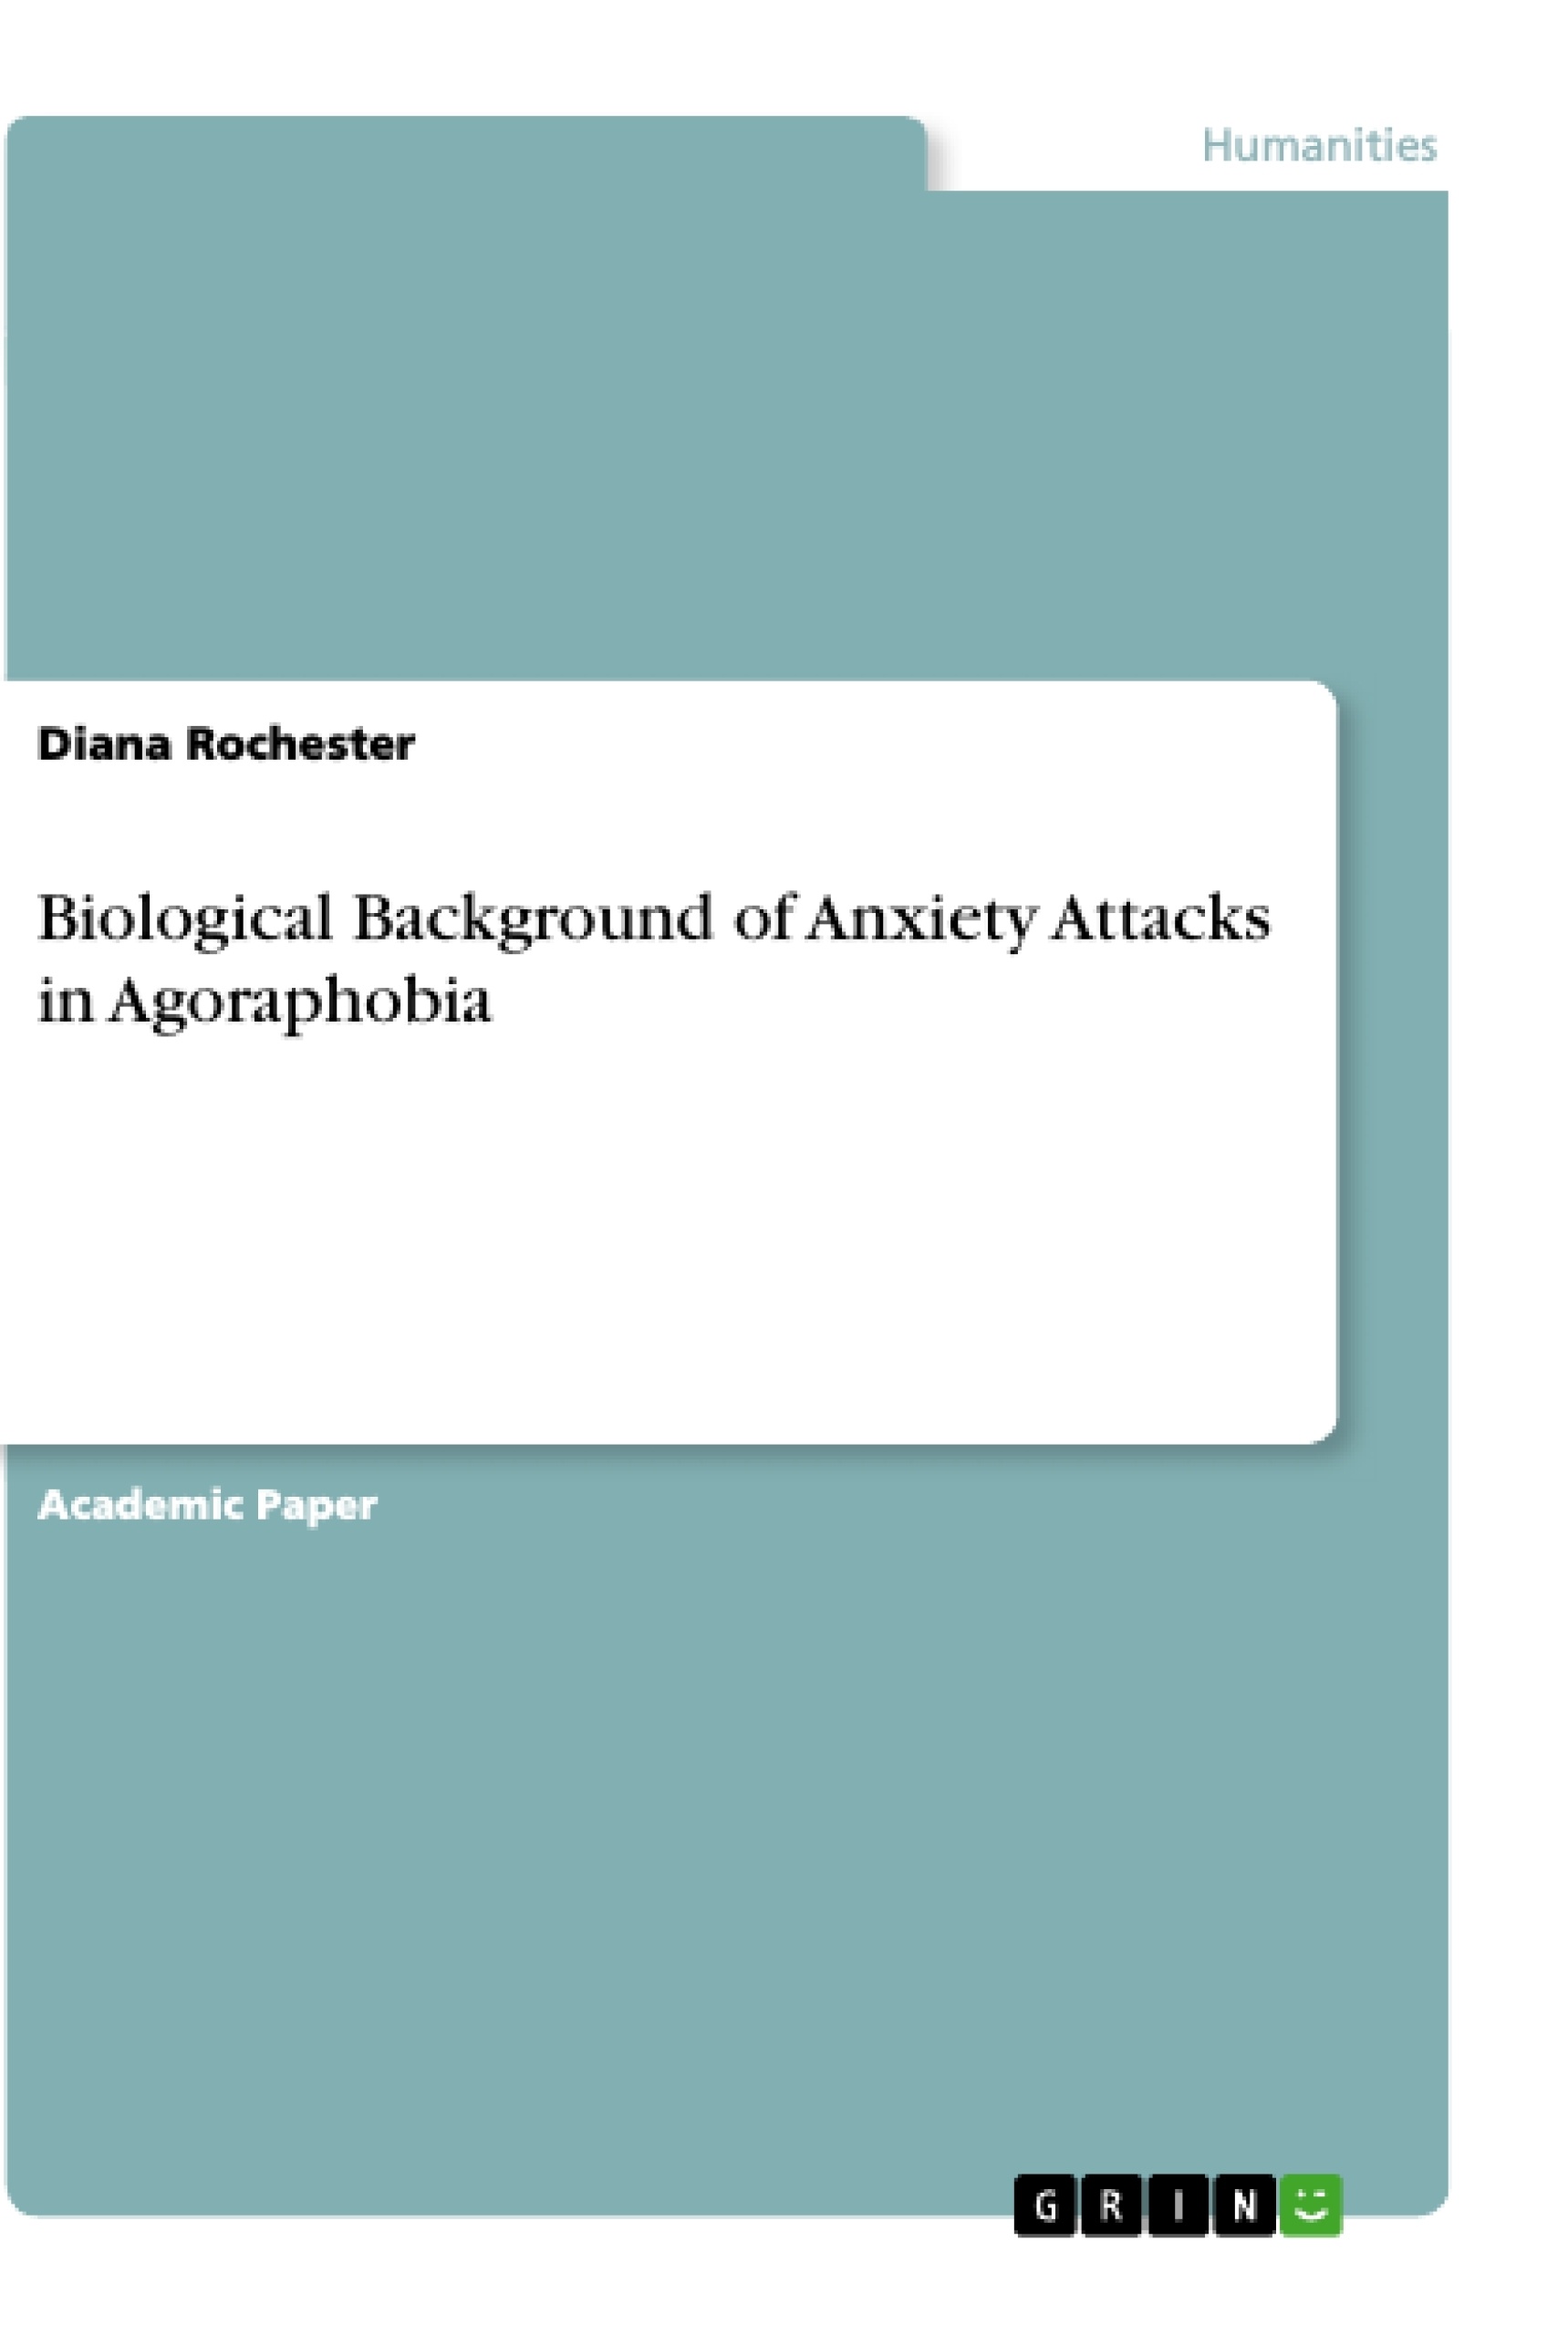 Titel: Biological Background of Anxiety Attacks in Agoraphobia